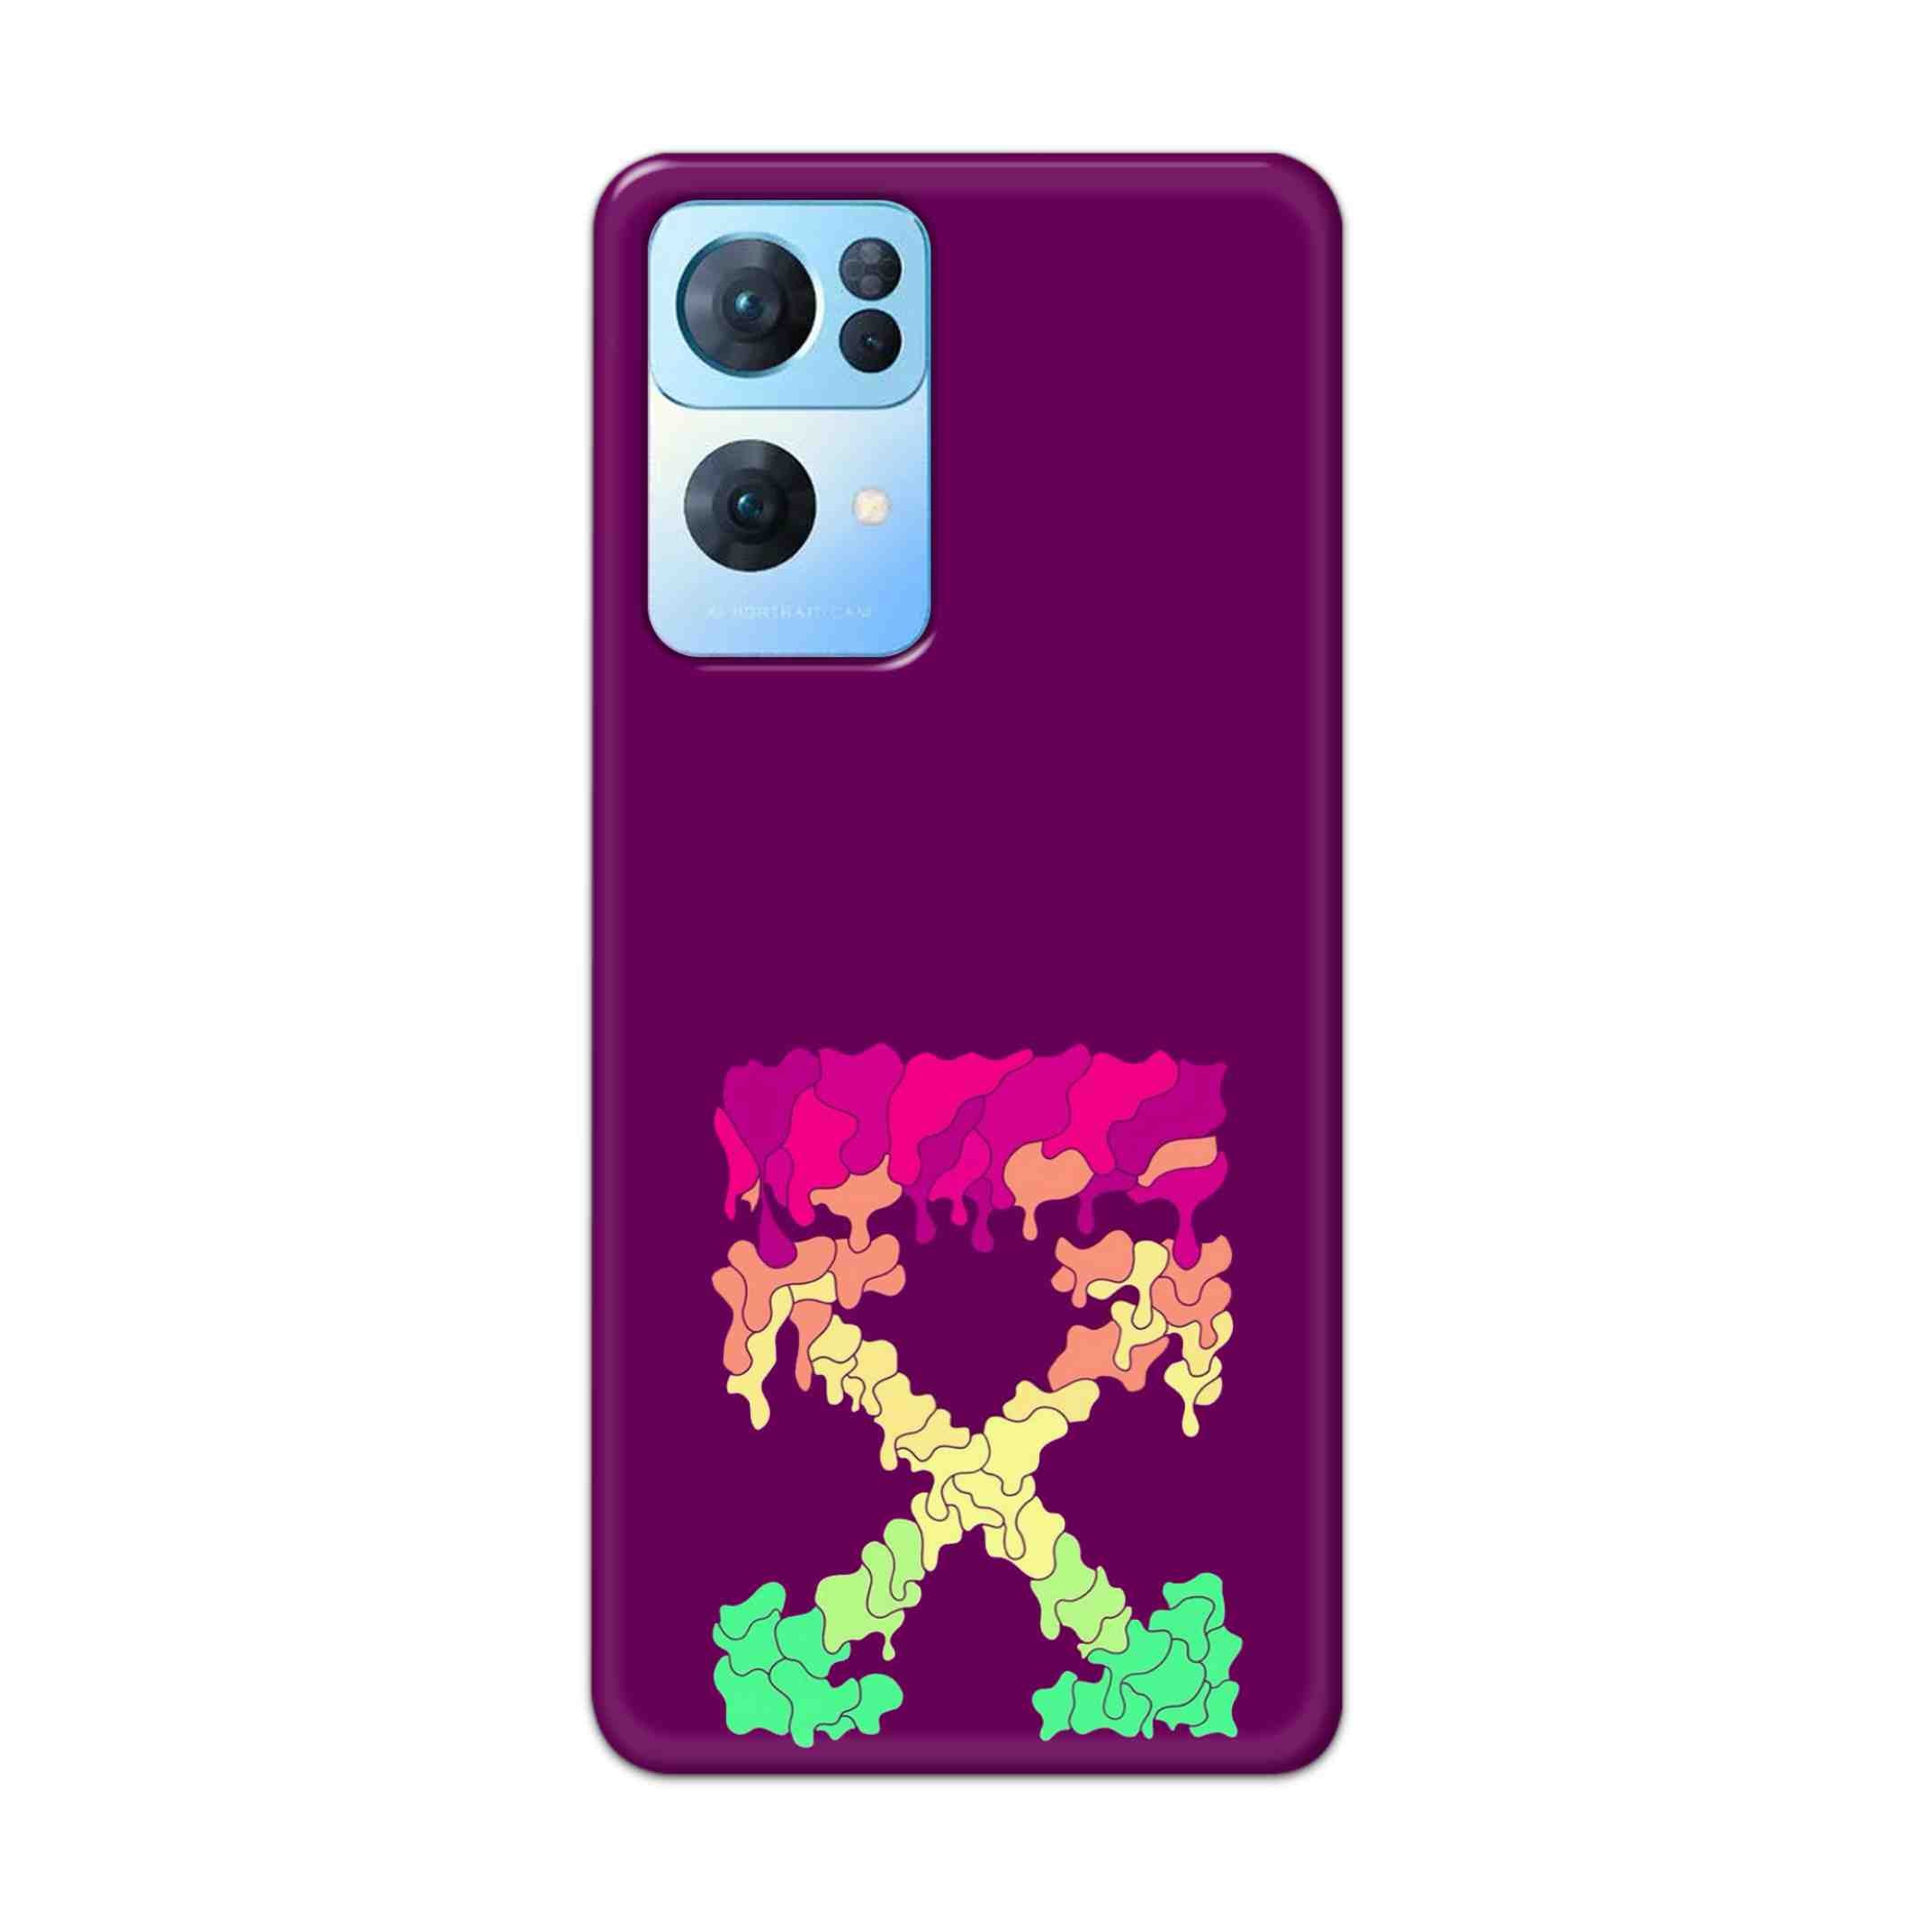 Buy X.O Hard Back Mobile Phone Case Cover For Oppo Reno 7 Pro Online